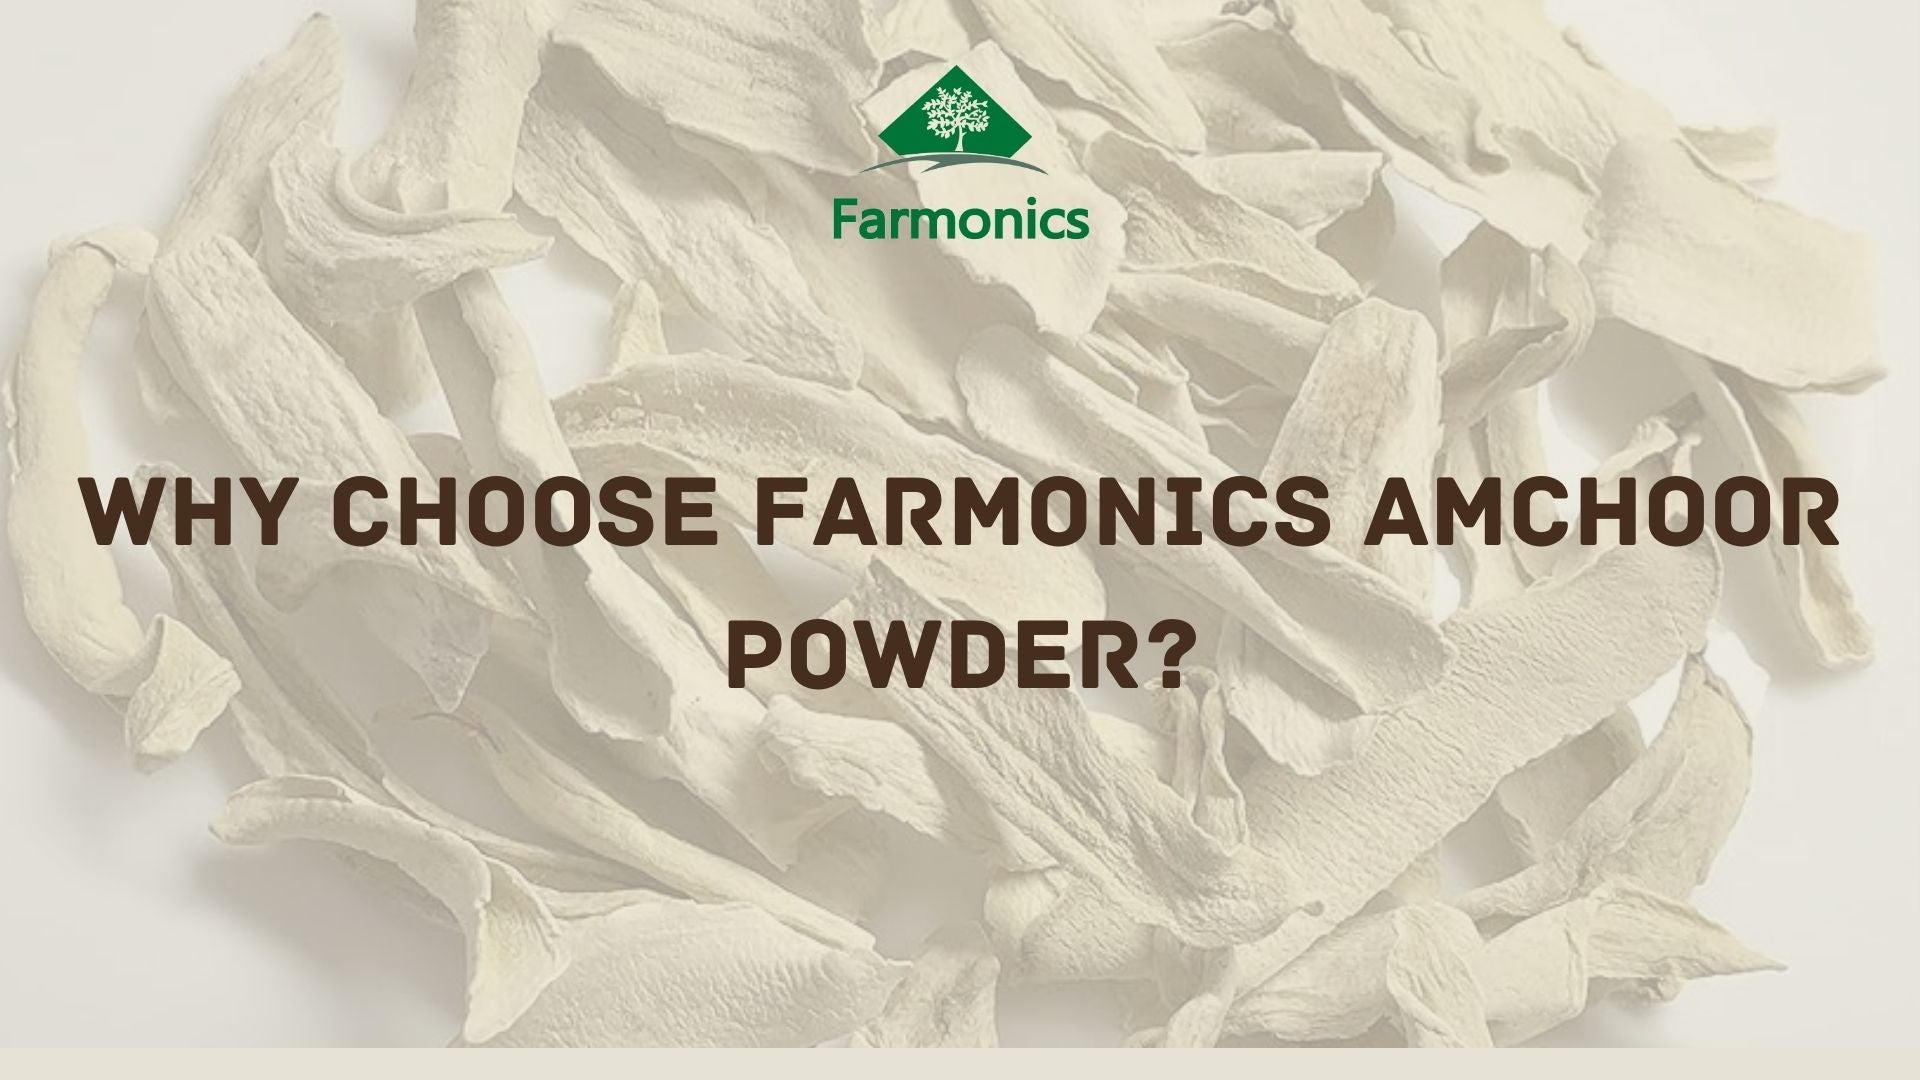 Here are some of the reason Why Choose Farmonics Amchoor Powder?